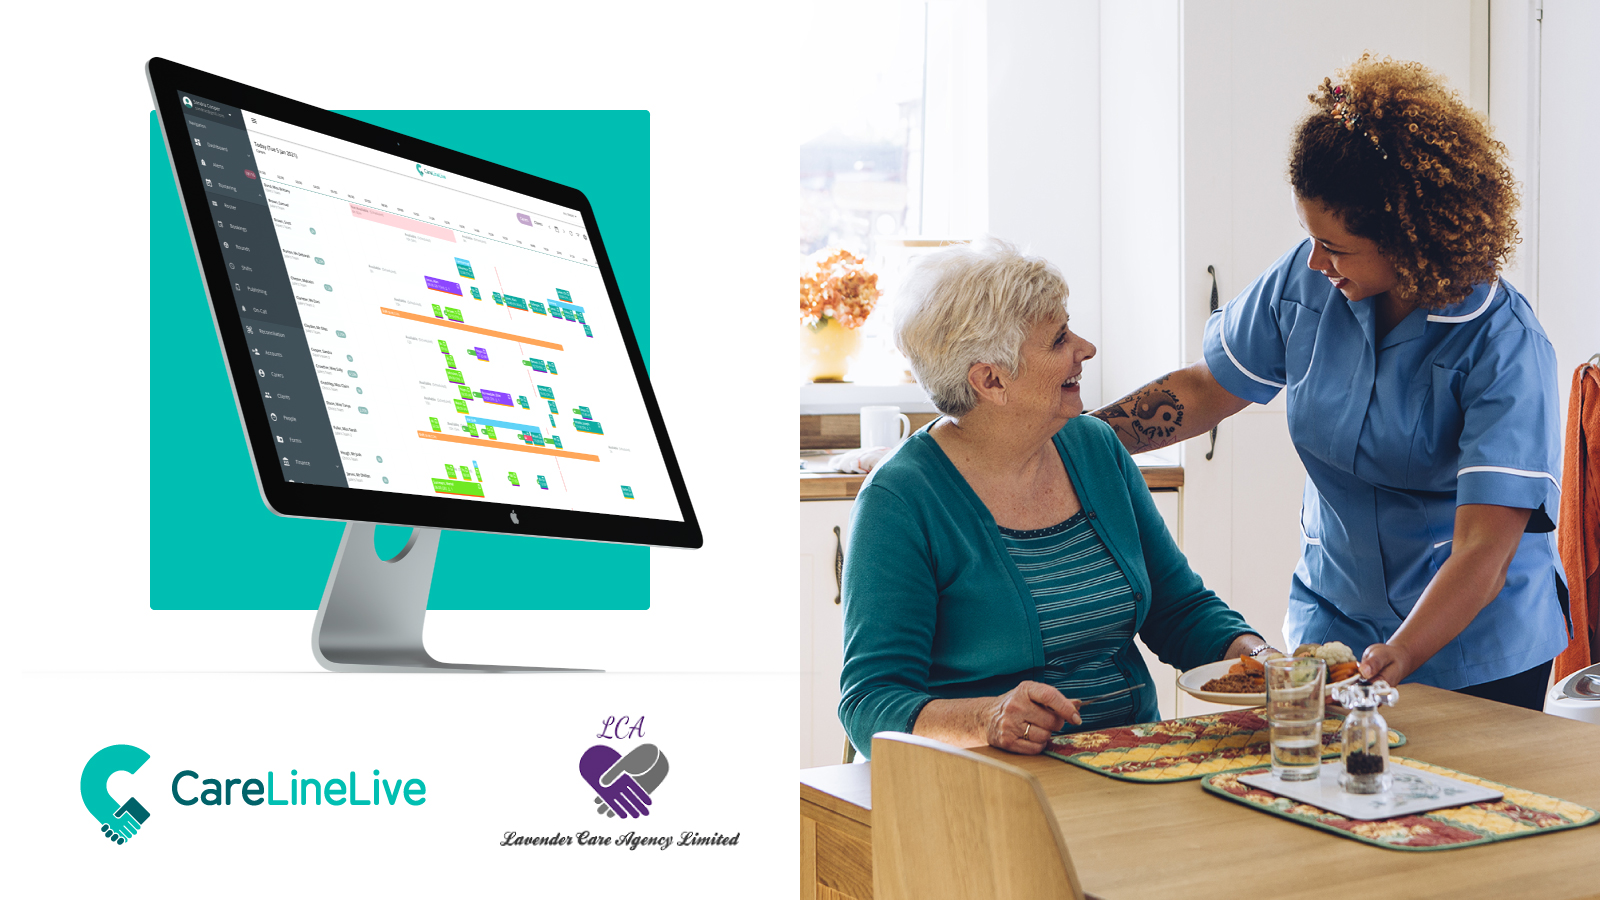 Lavender Care Adopts CareLineLive’s Homecare Management Solution to Increase Efficiencies and Capacity